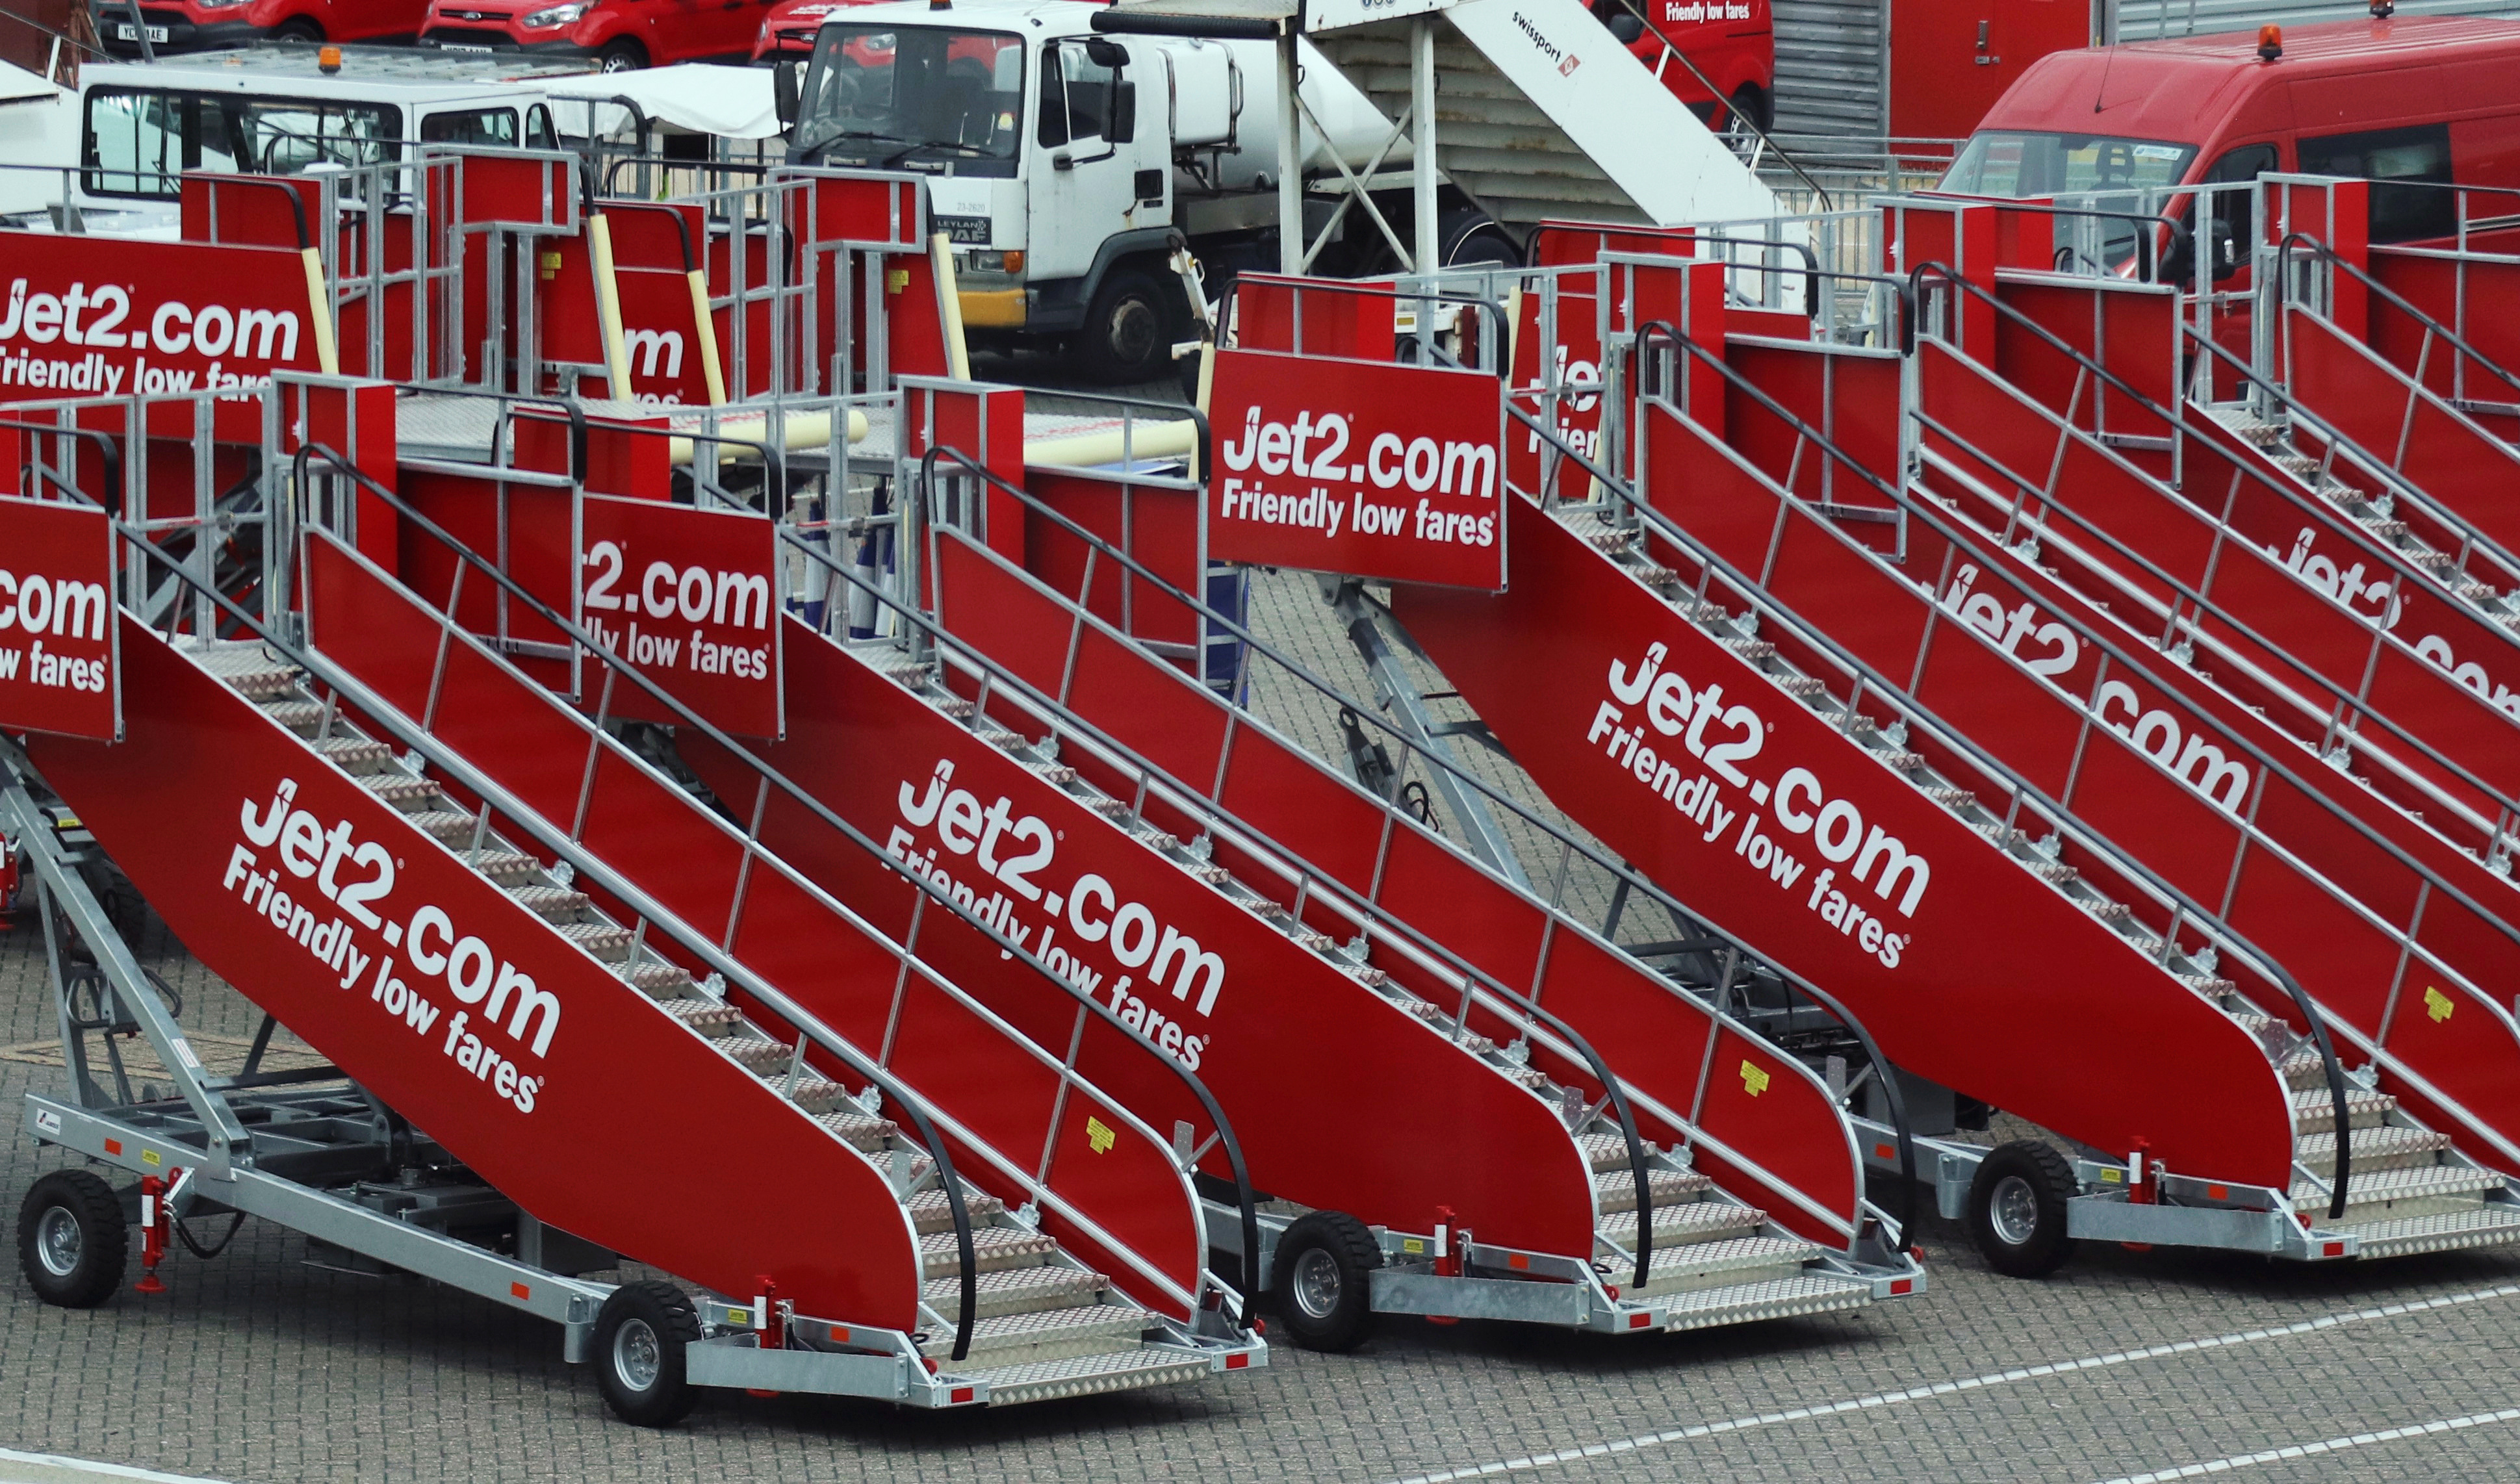 Jet2.com aircraft boarding stairs are stored at Stansted airport in Stansted, Britain